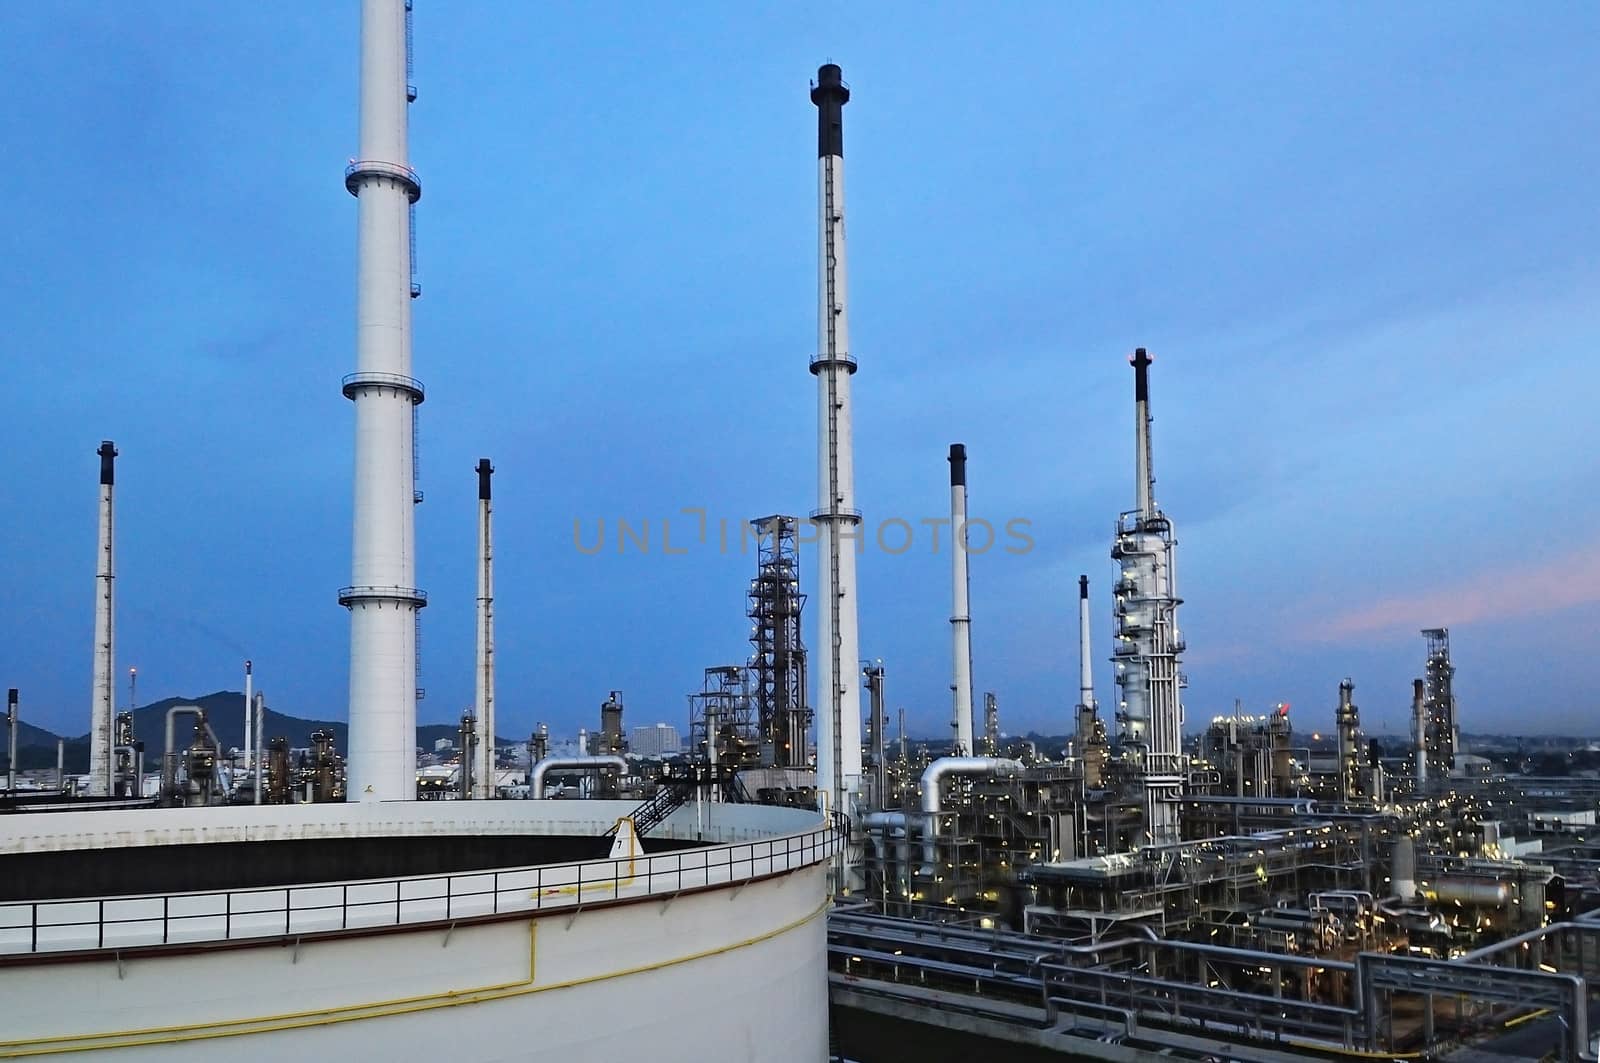 Oil Refinery factory twilight by think4photop